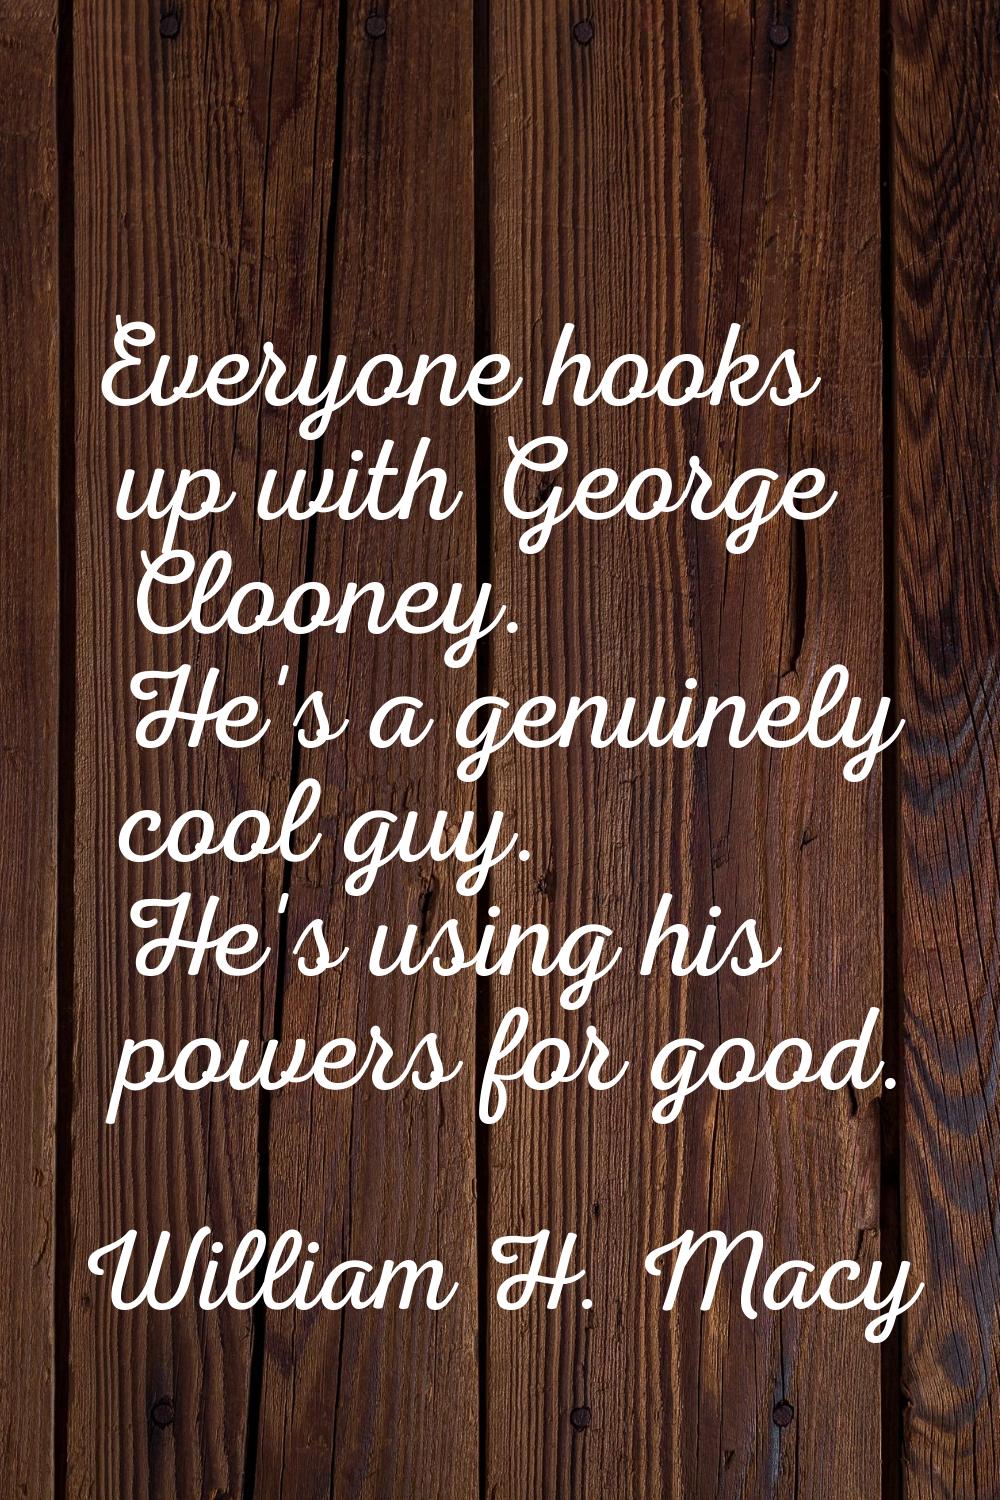 Everyone hooks up with George Clooney. He's a genuinely cool guy. He's using his powers for good.